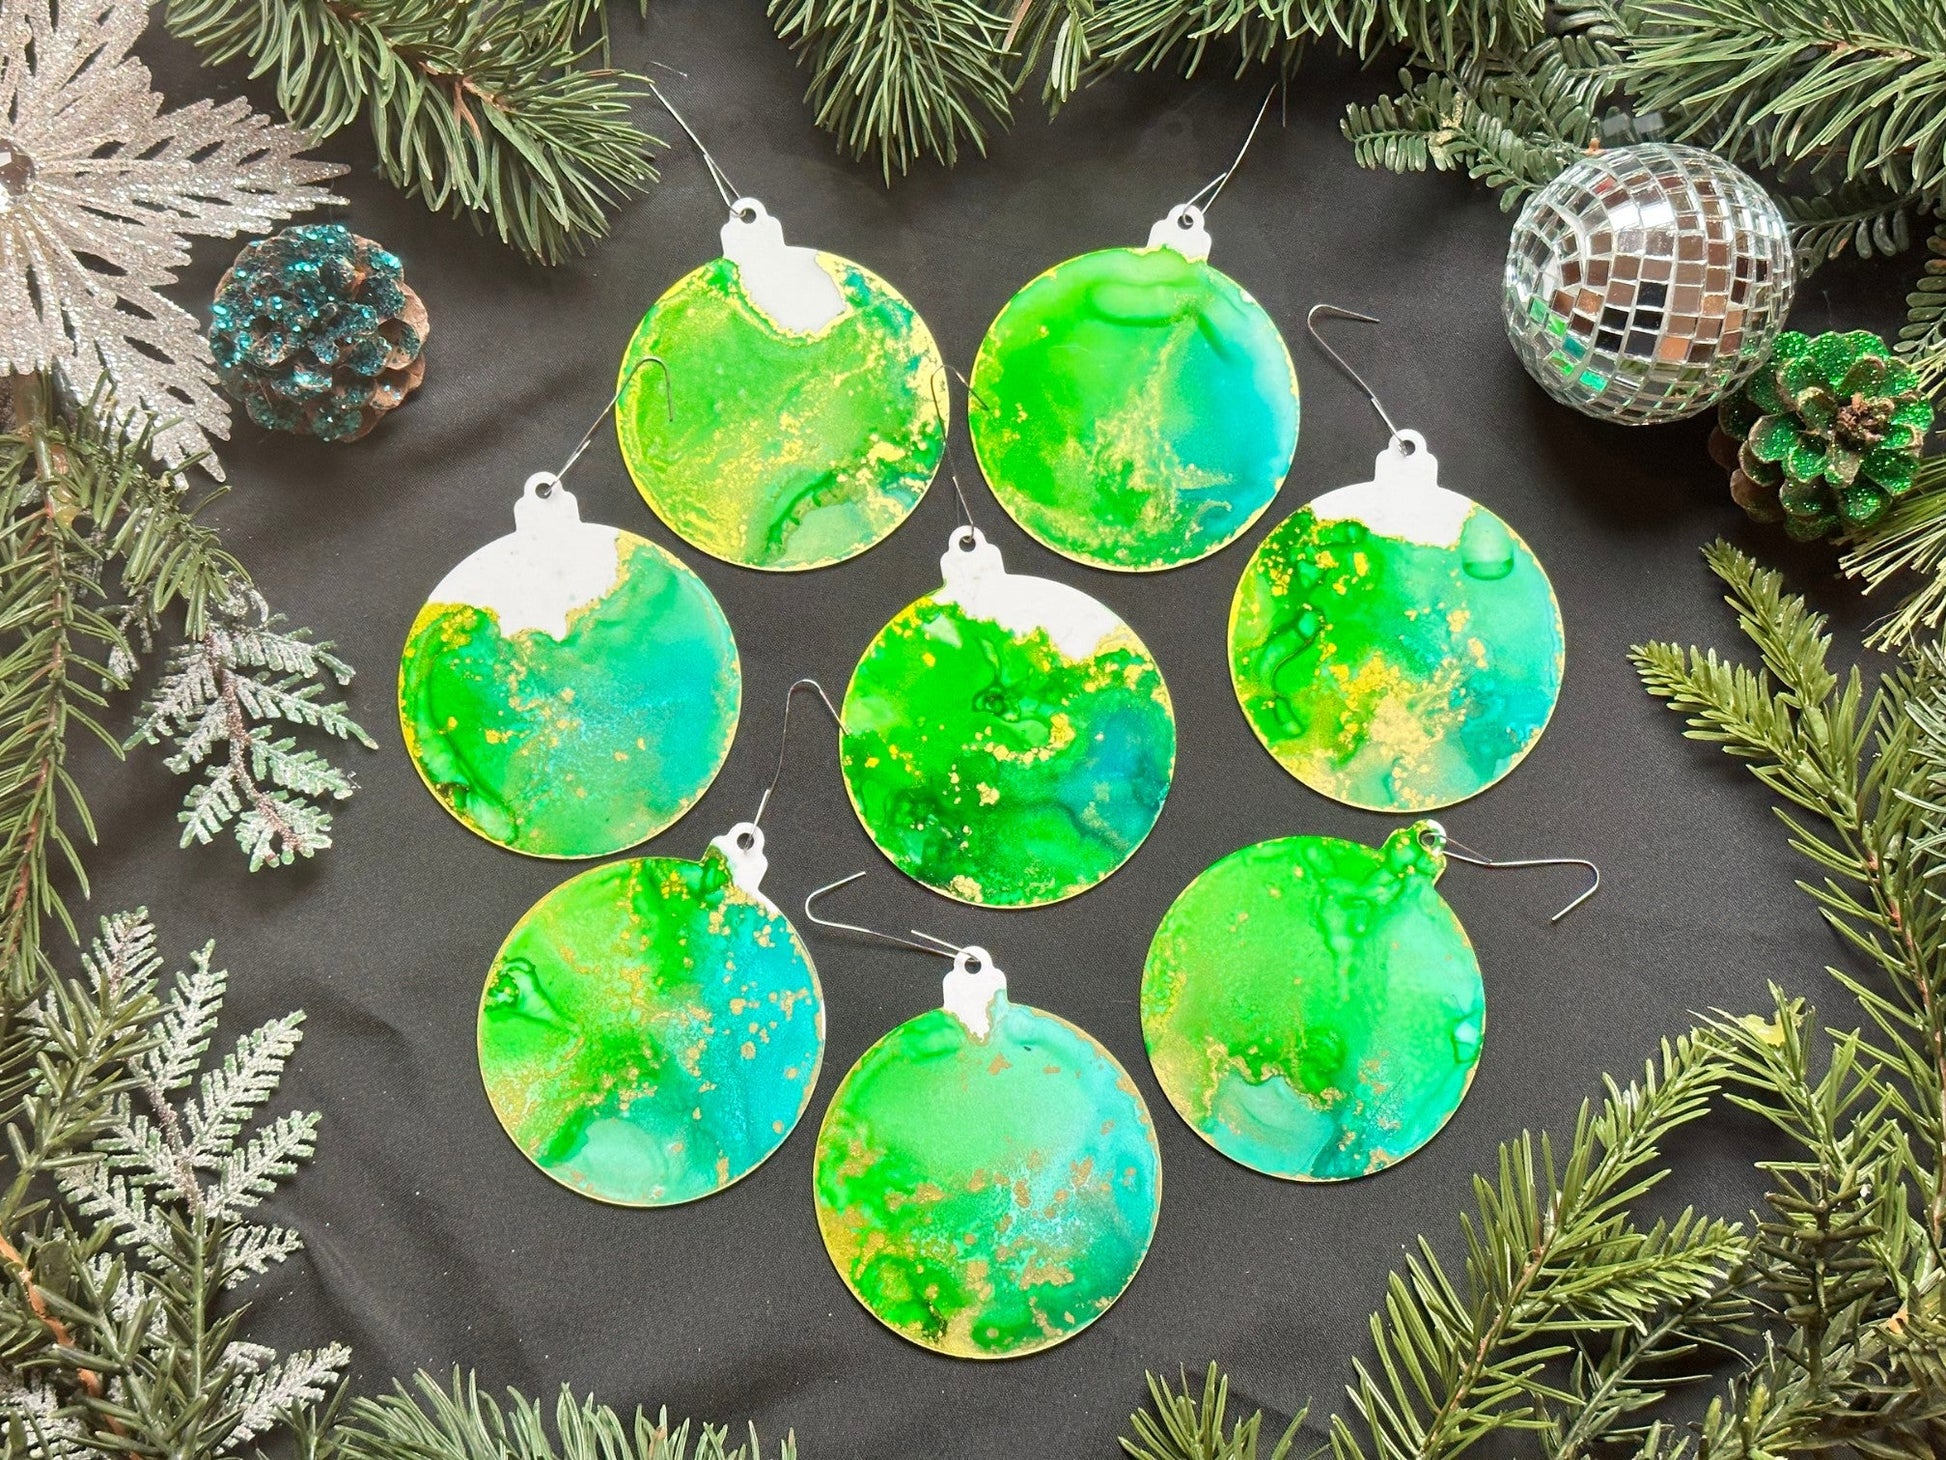 Lime, Aqua and Gold Inks Hand-Painted Ornaments - Set of 8 - Driftless Enchantments